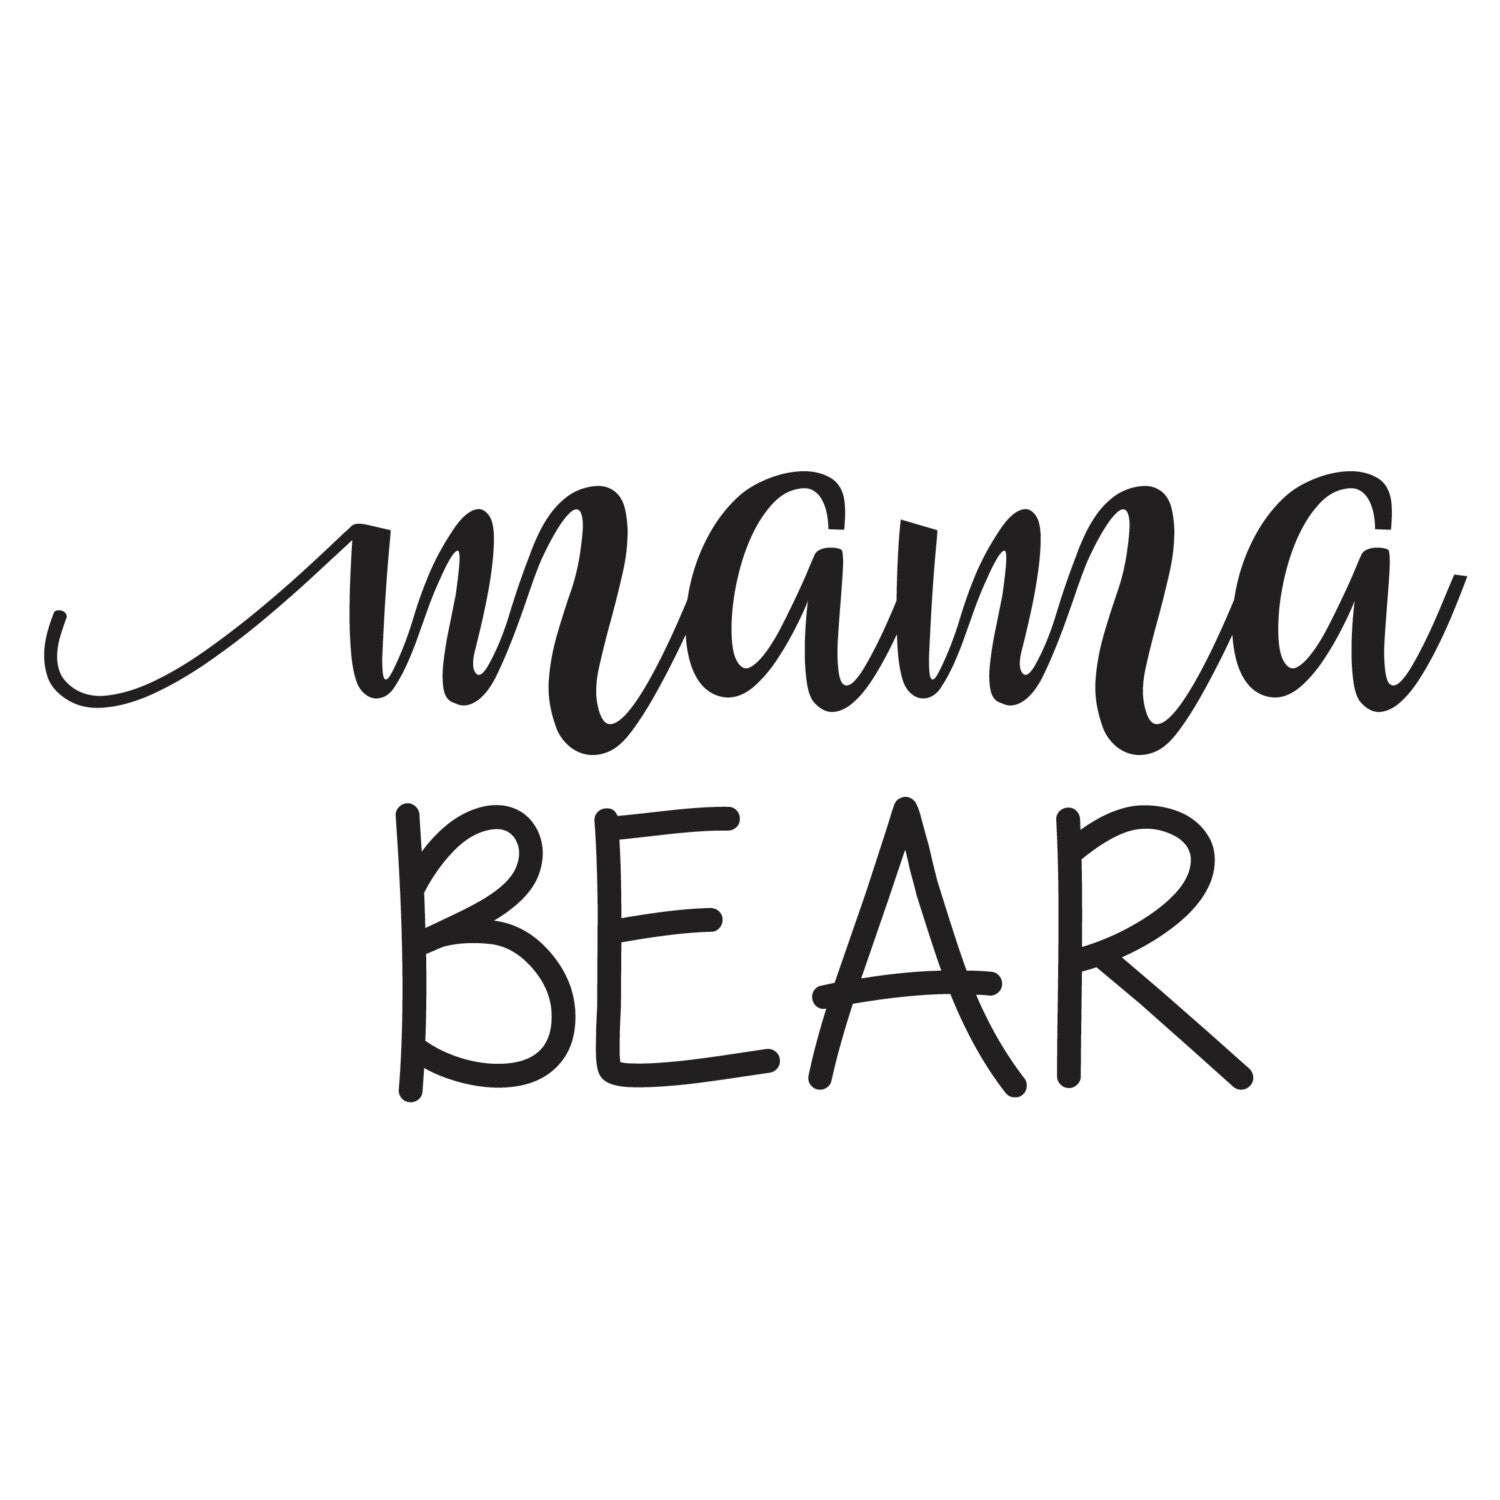 Download Mama Bear SVG File by CaseCustomCreations on Etsy